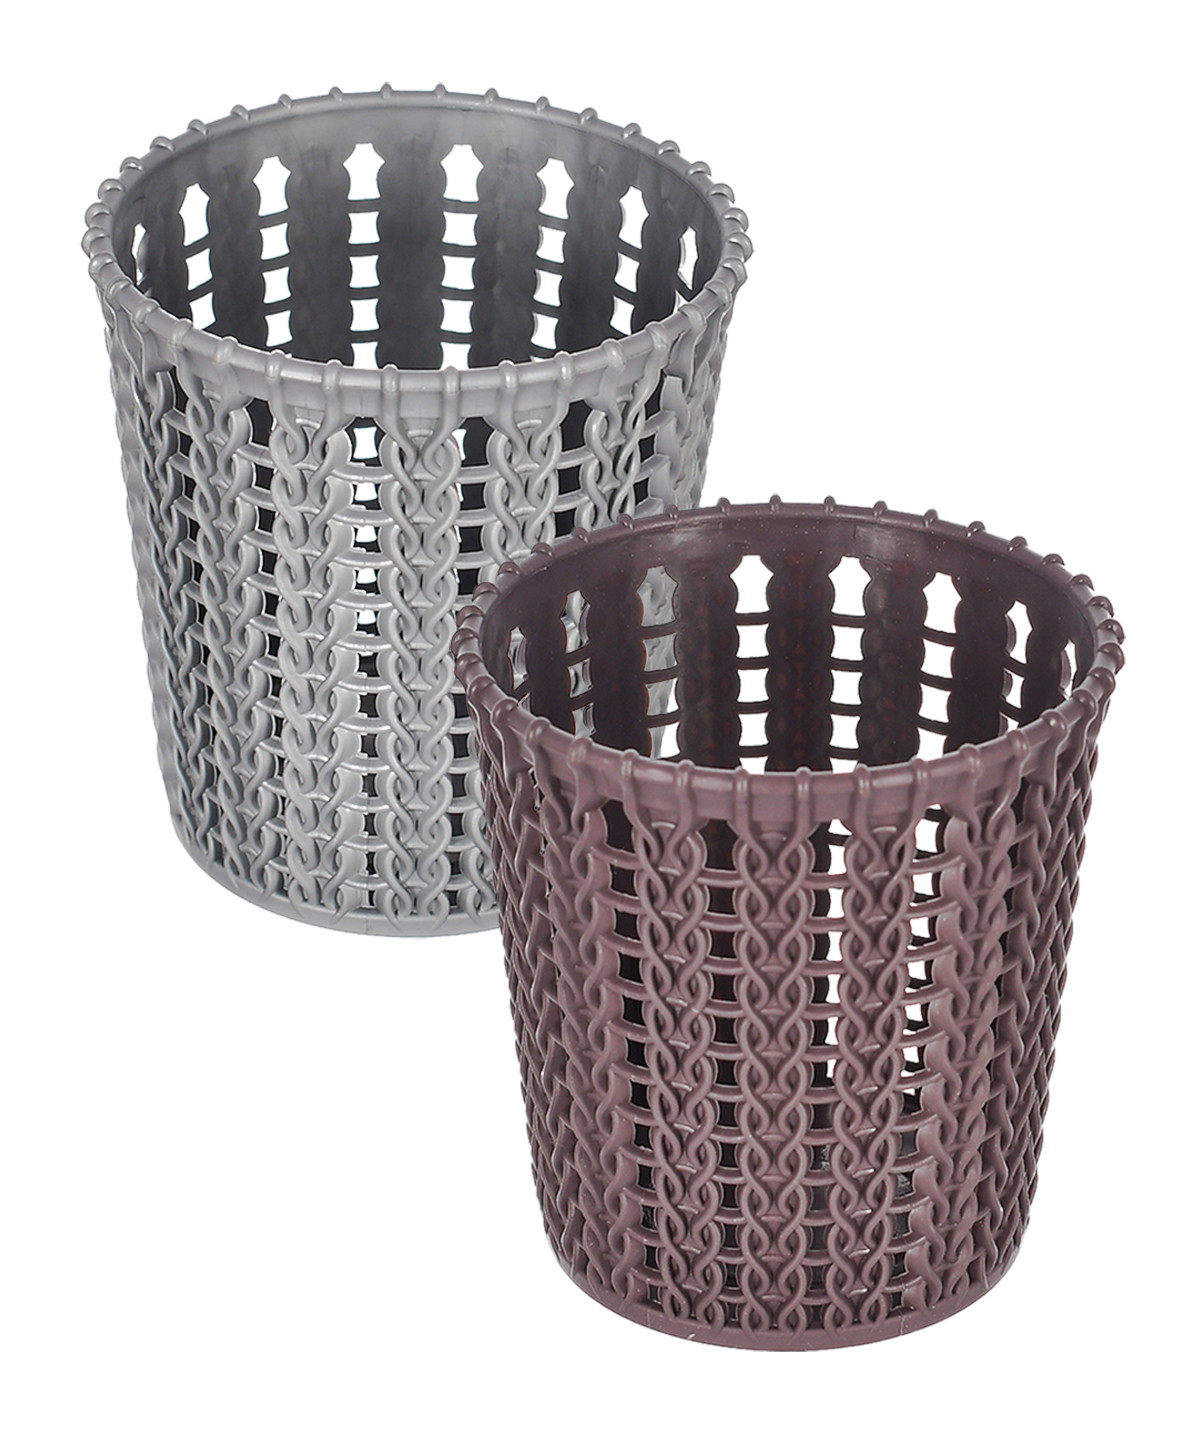 Kuber Industries Round Shape M 10 Multipurpose Plastic Holder/Organizer/Stand For Kitchen, Bathroom, Office Use - Pack of 2 (Brown & Grey)-46KM0431